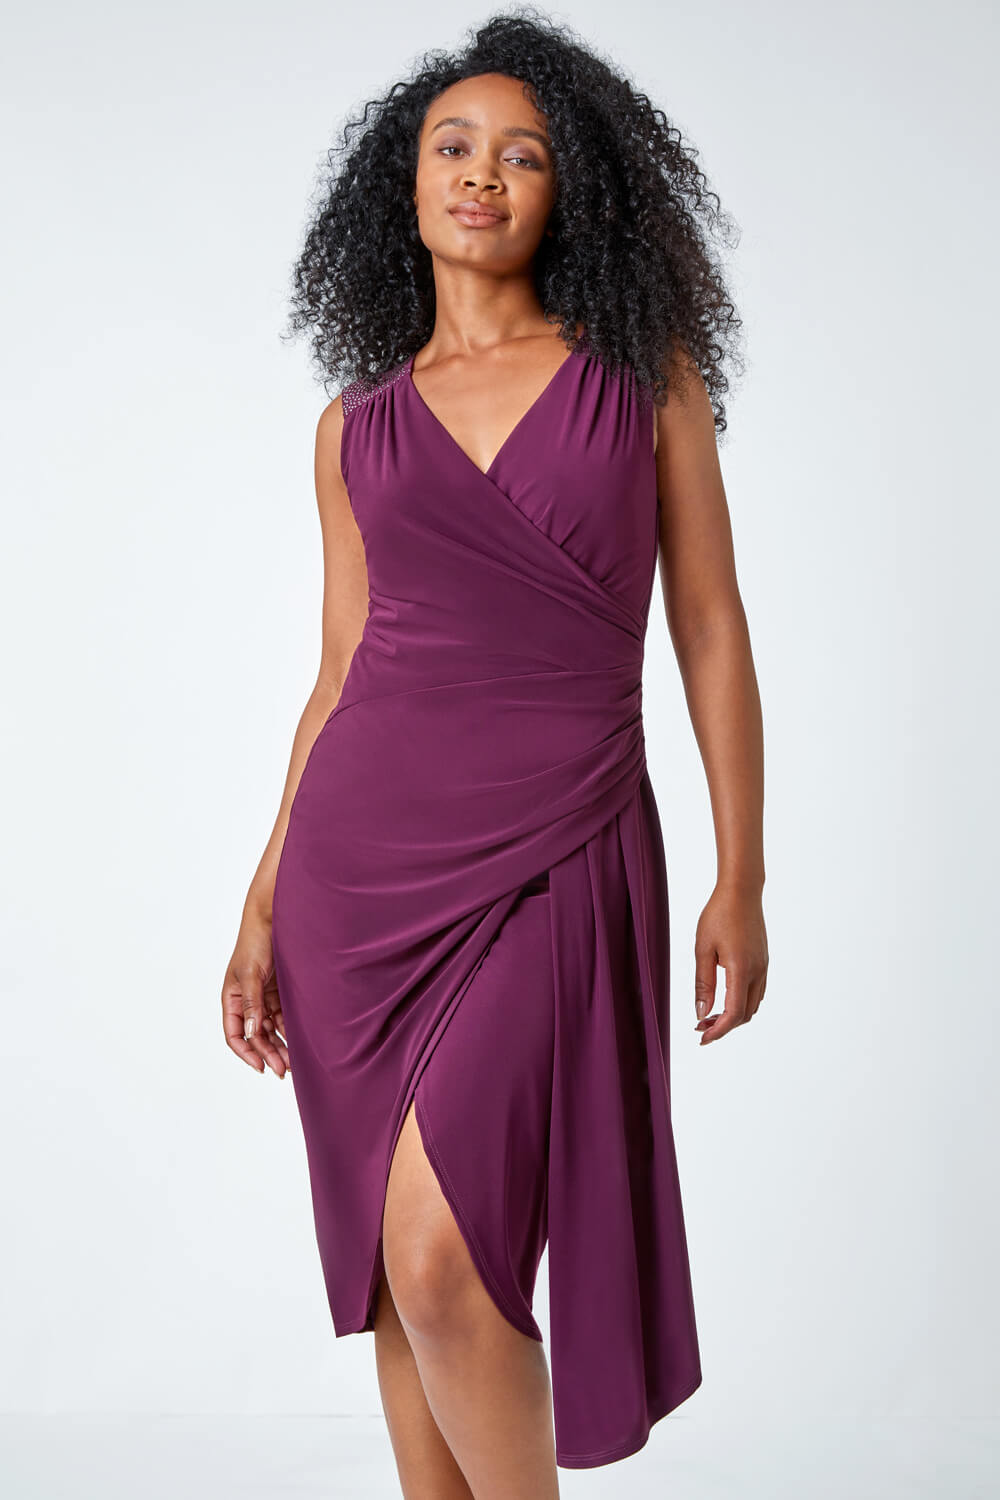 Plum Petite Embellished Ruched Stretch Dress, Image 2 of 5